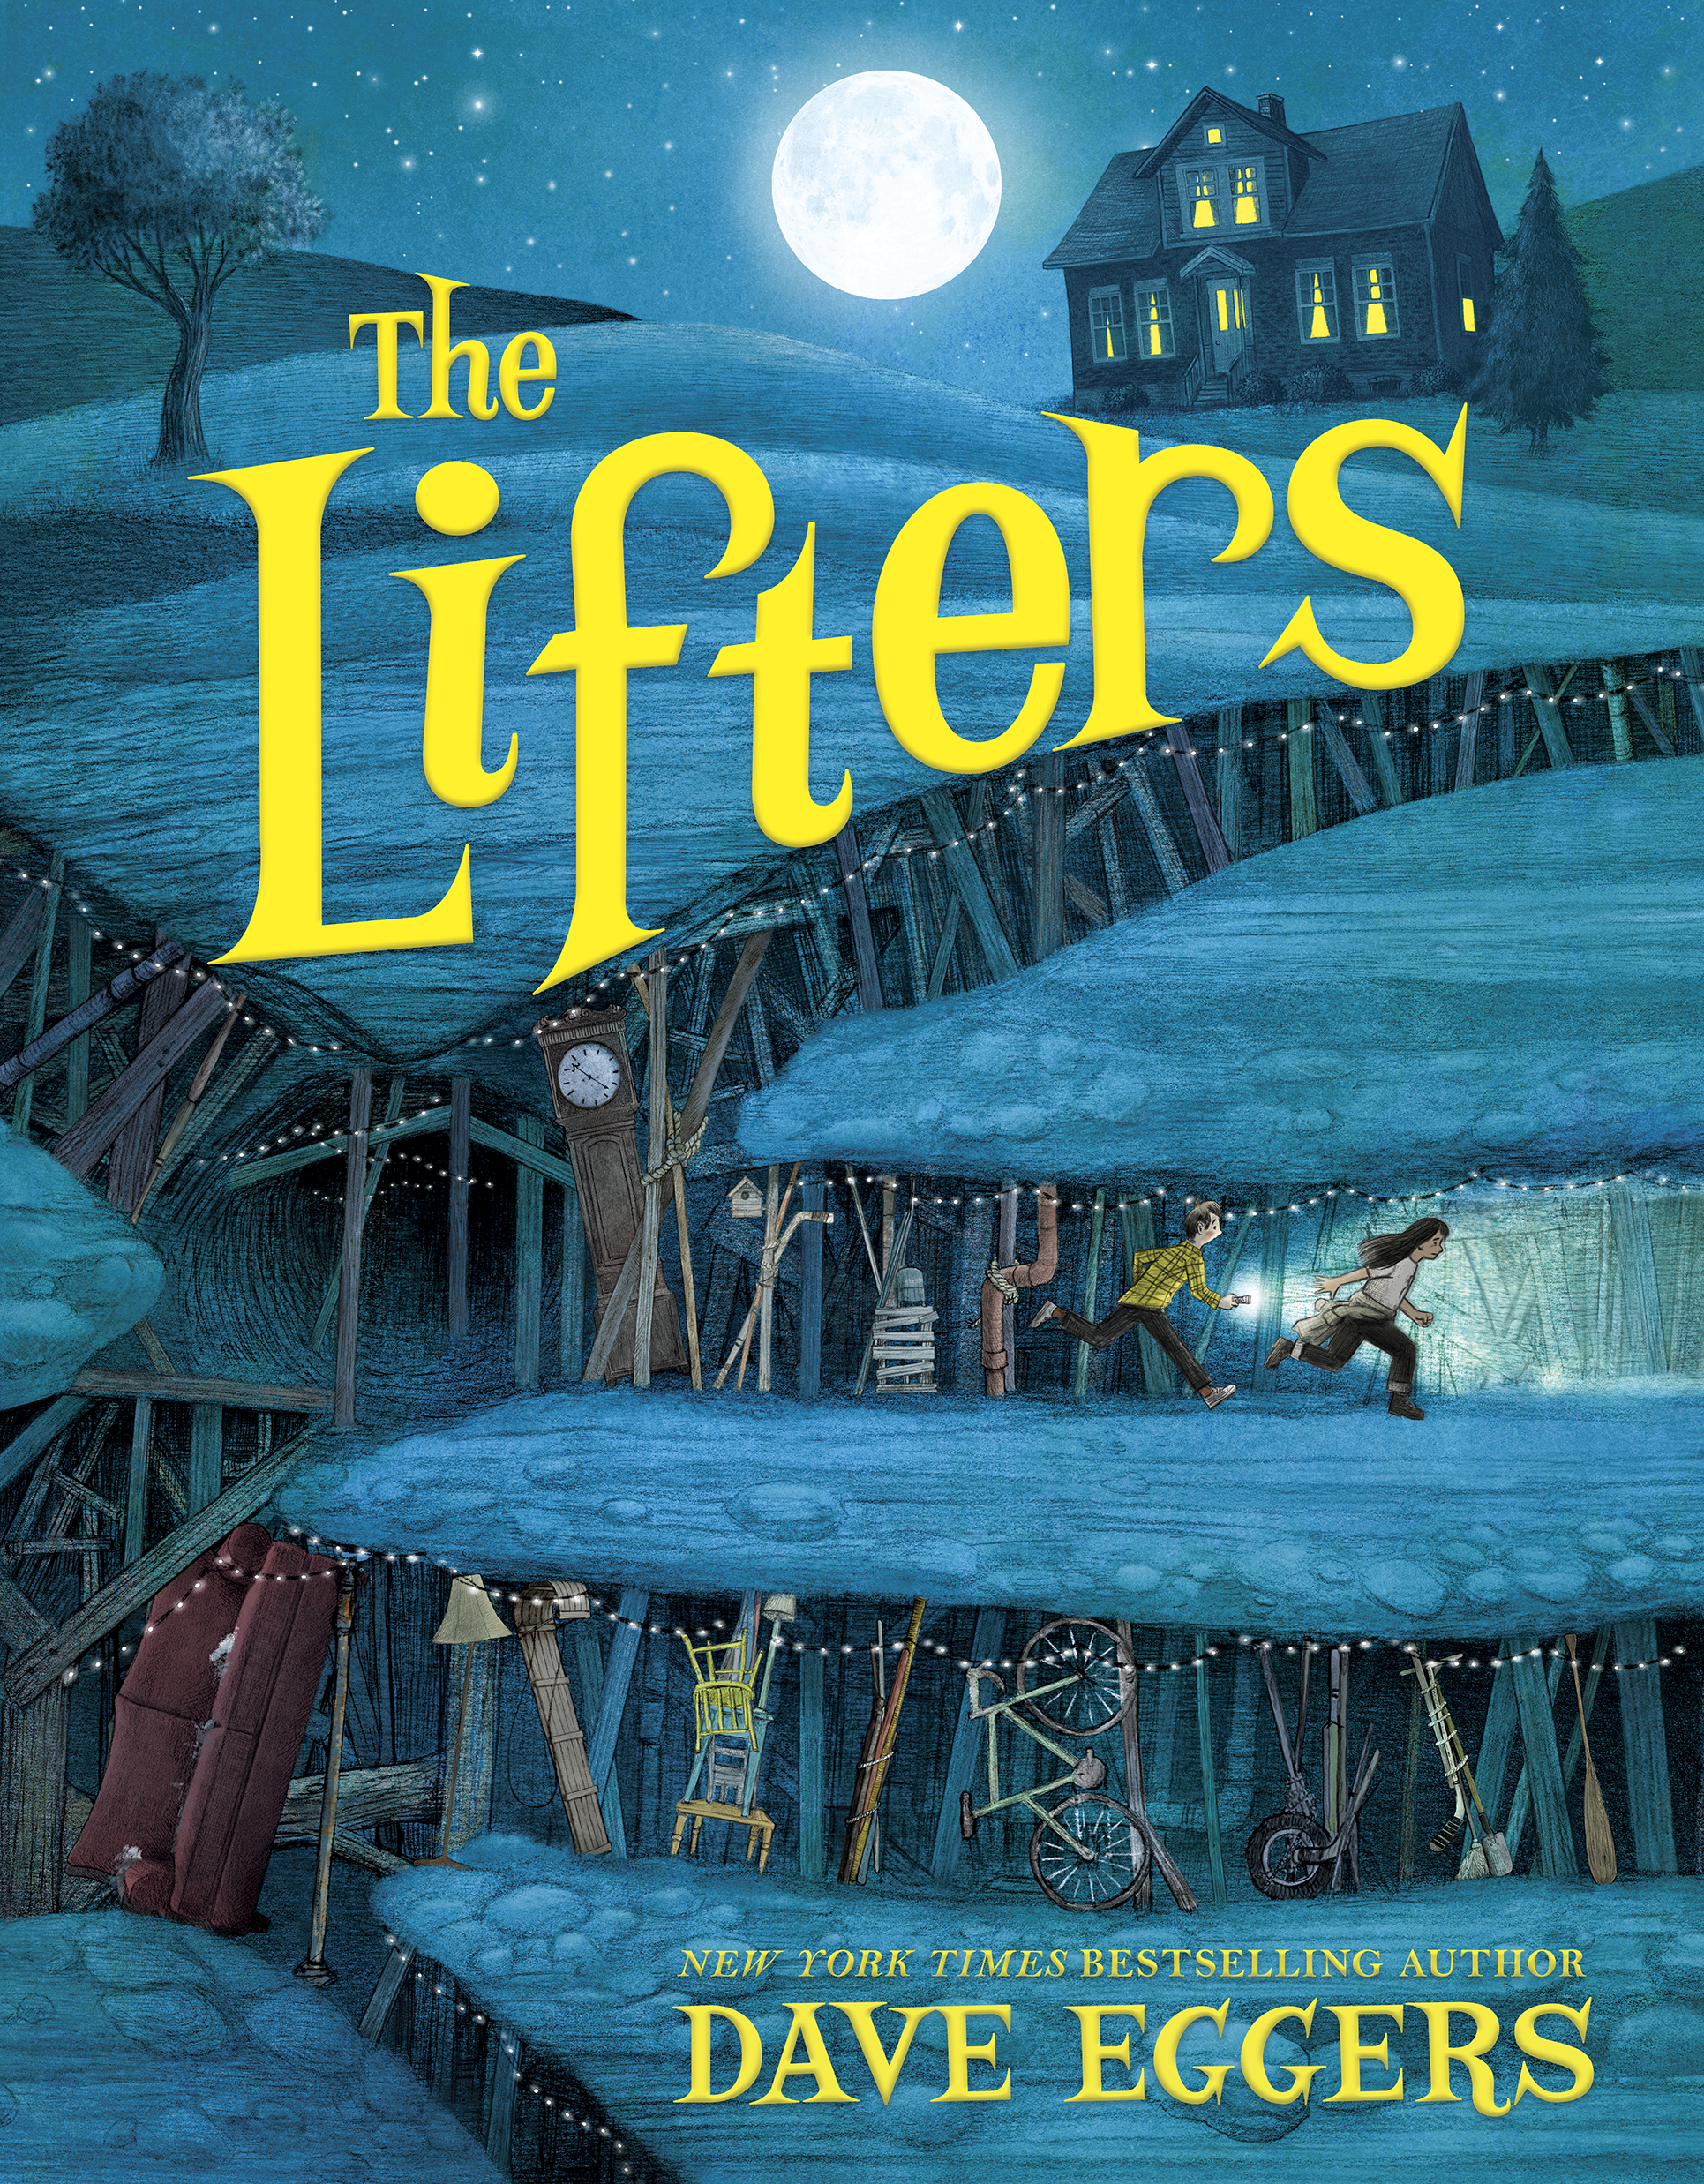 The Lifters book cover